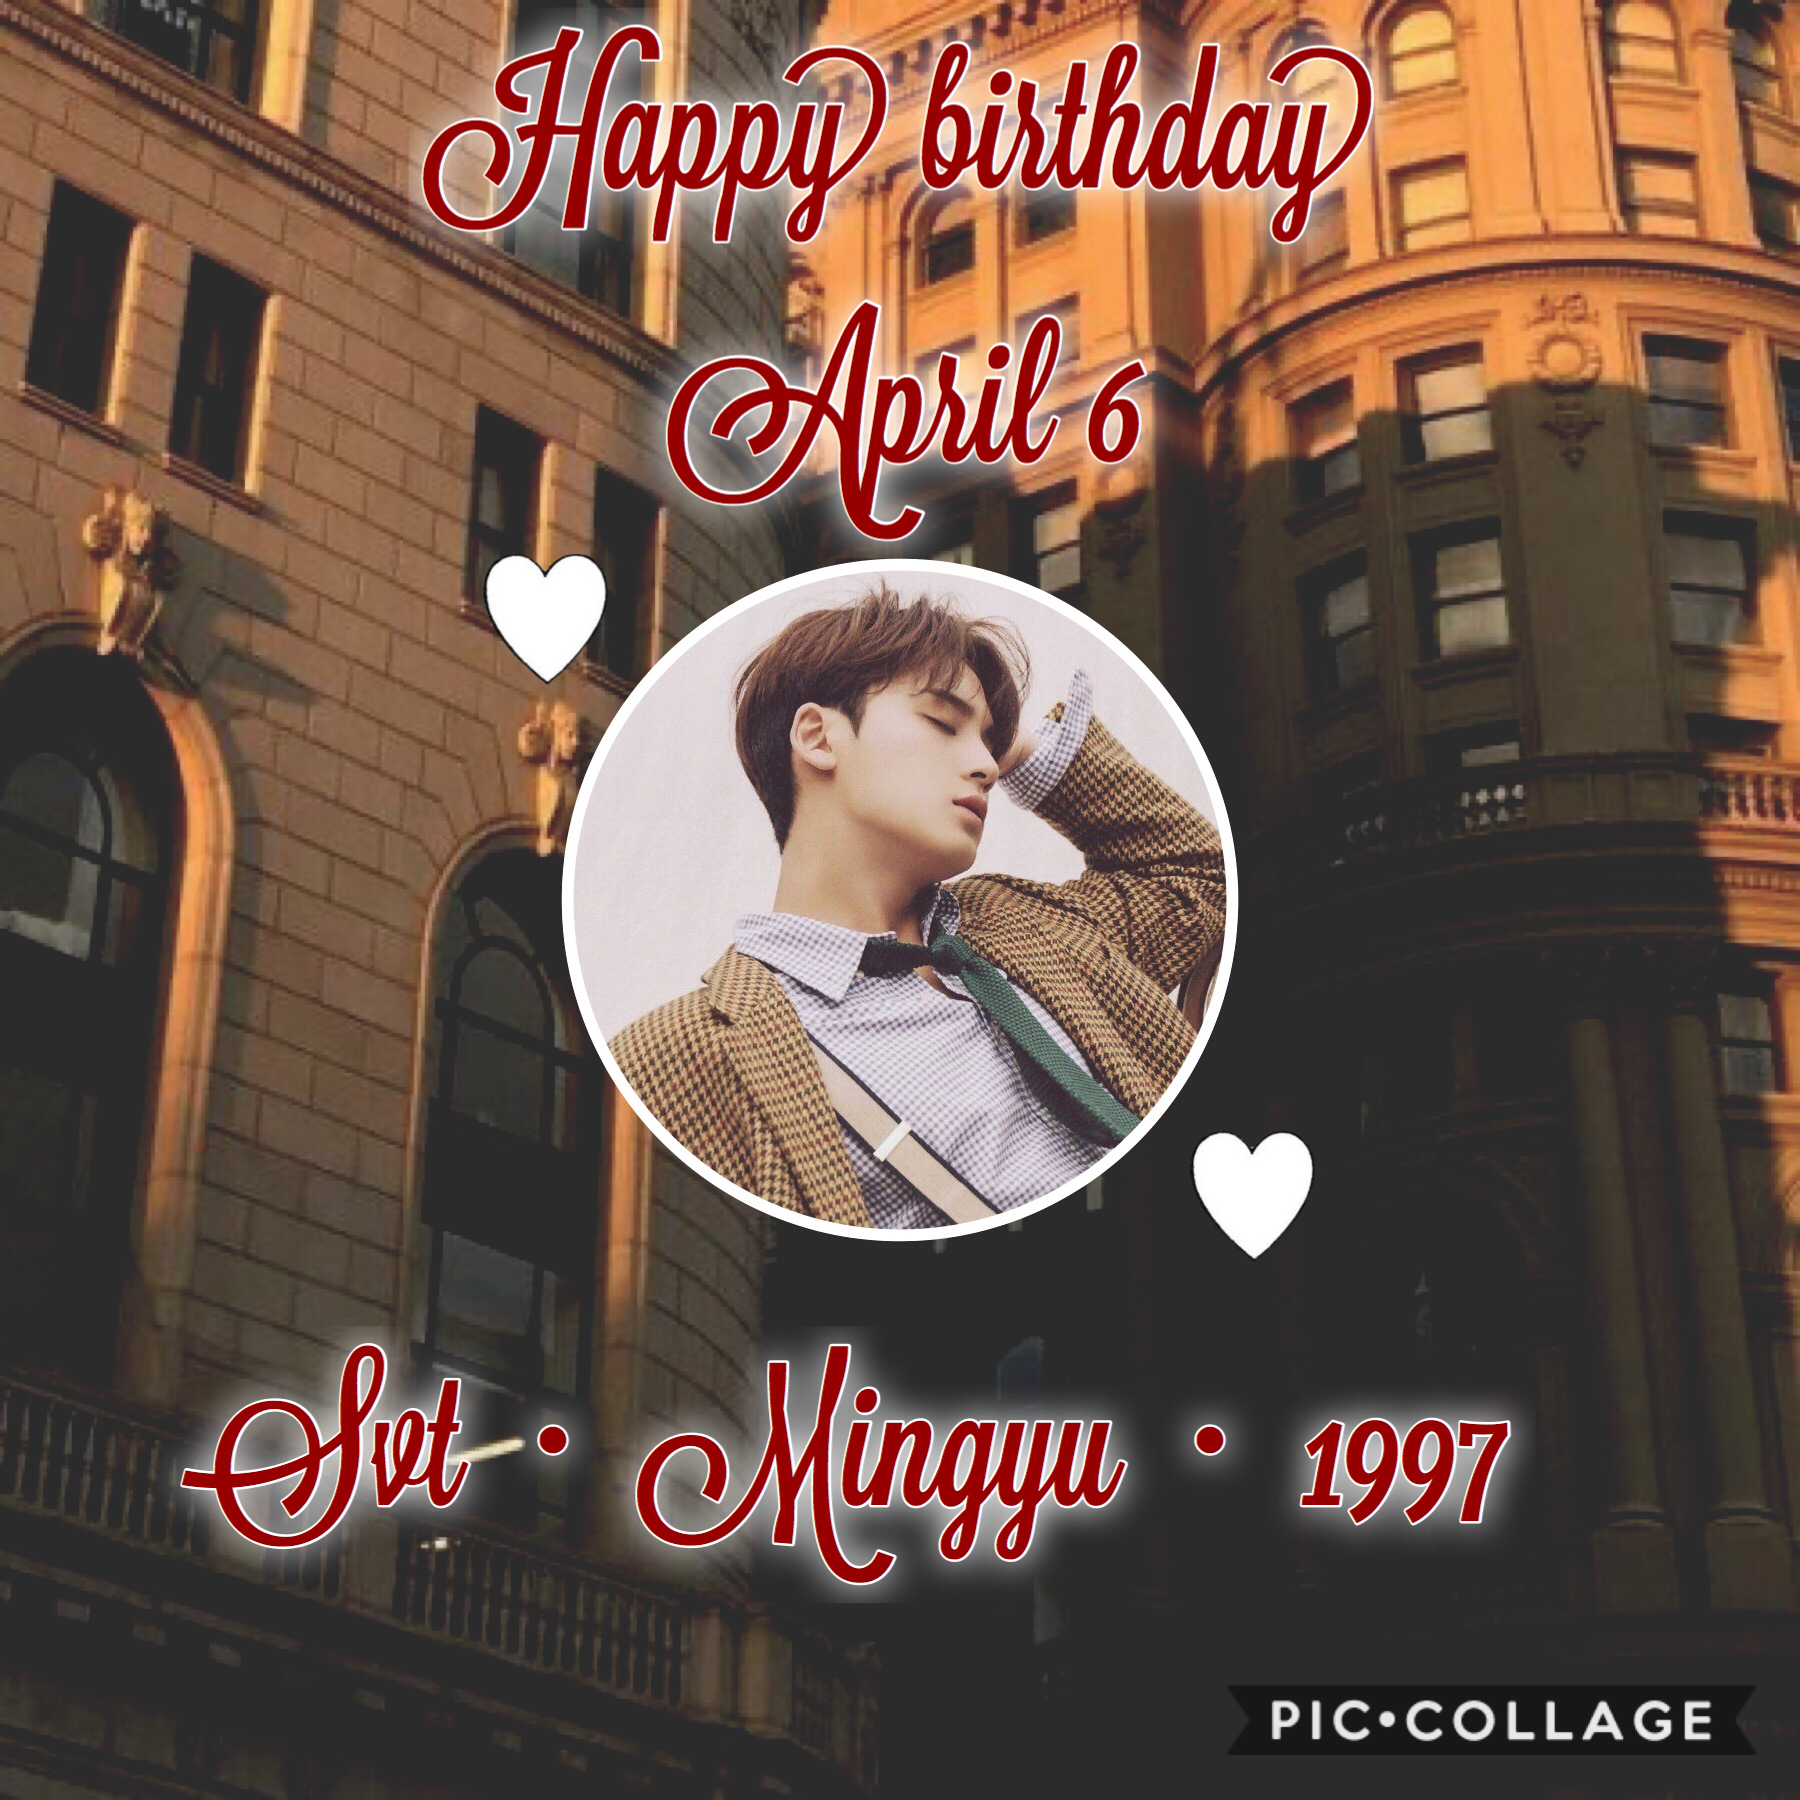 •🌷🌹•
Happy birthday to a very handsome man👀 His voice is also really nice and soothing💞
Other birthdays:
•VIXX’s Ken~ April 6
•SUPER JUNIOR’S Siwon~ April 7
🌹🌷~Whoop~🌷🌹